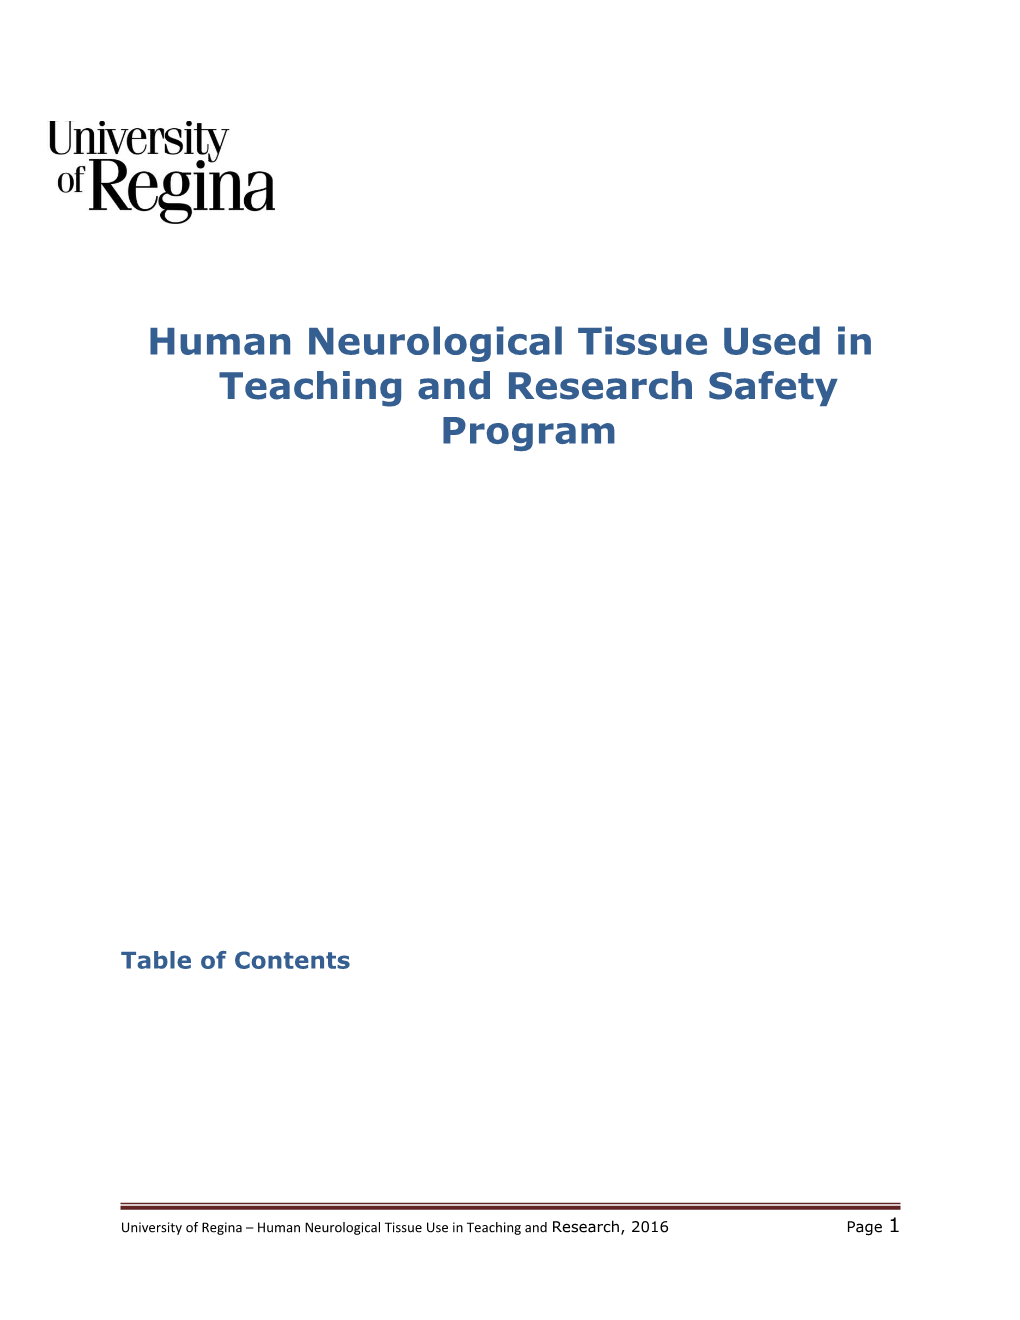 Human Neurological Tissue Used in Teaching and Research Safety Program